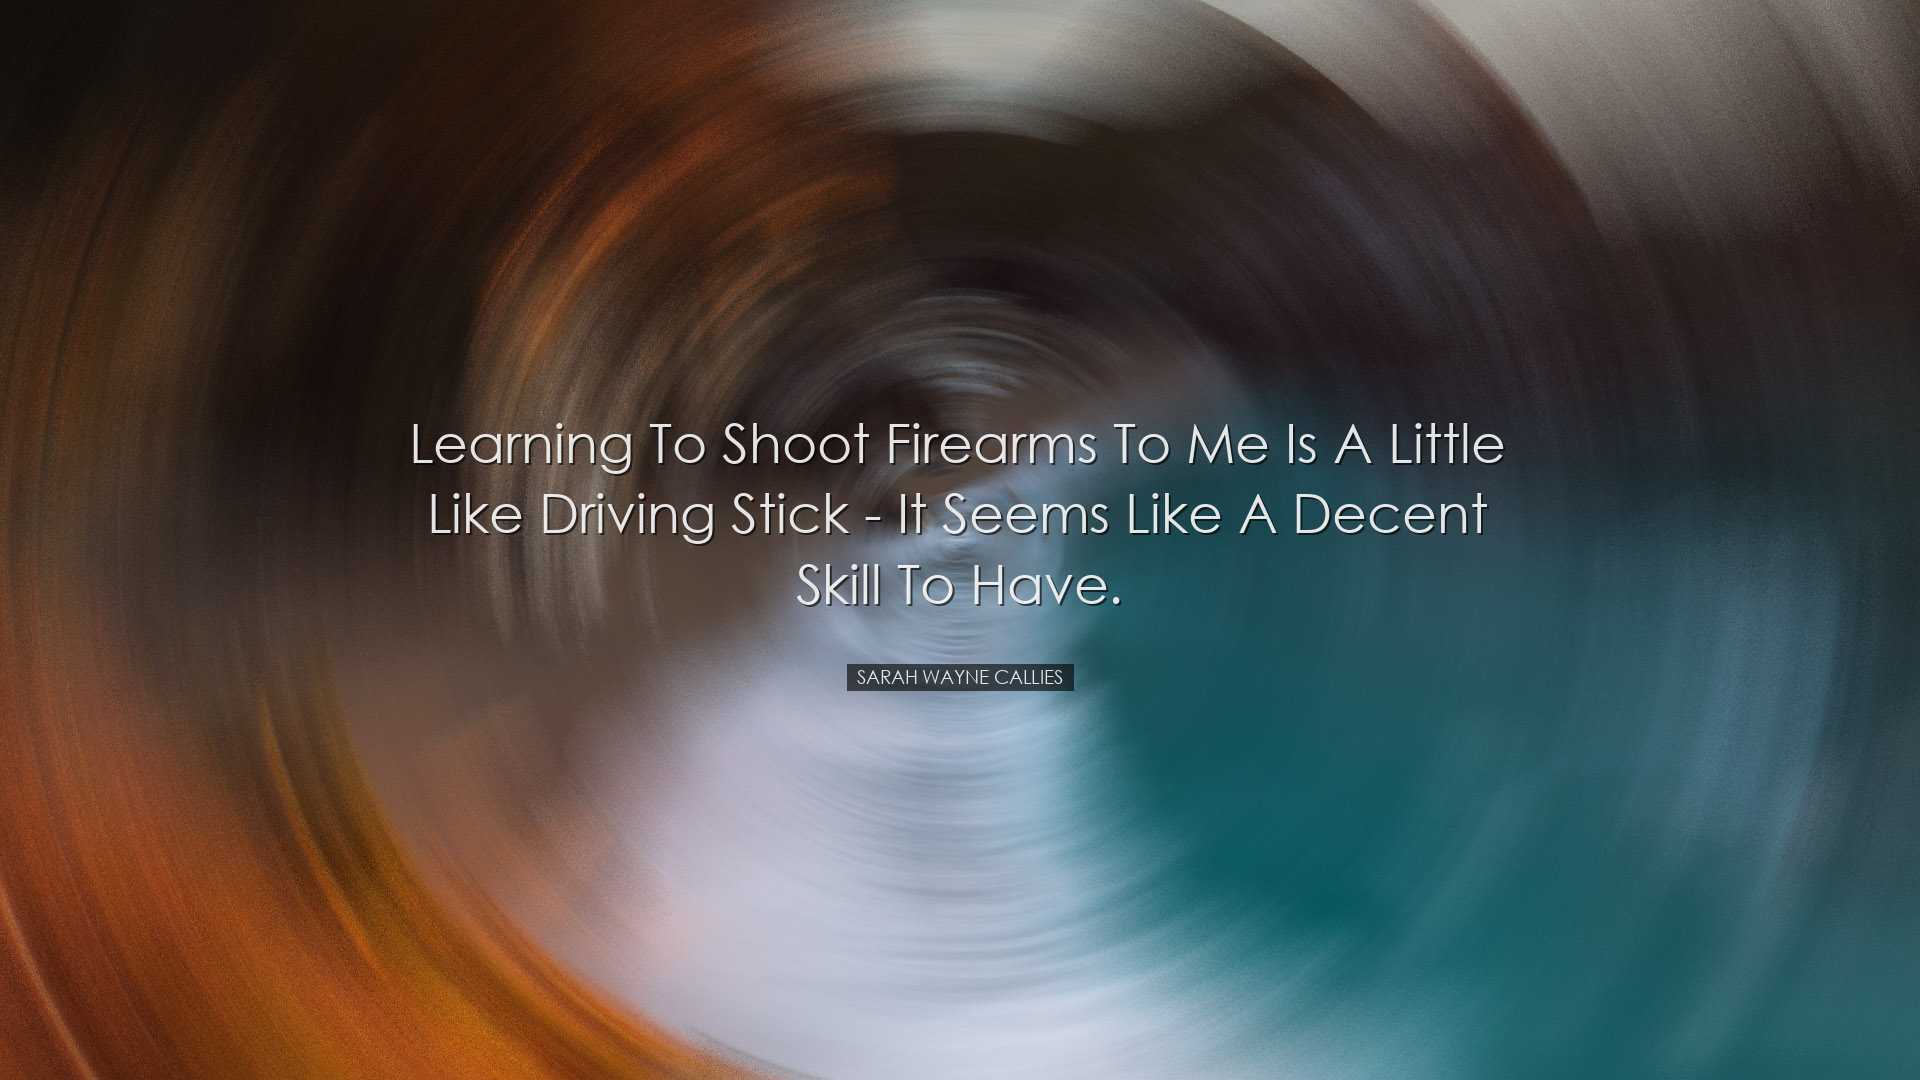 Learning to shoot firearms to me is a little like driving stick -